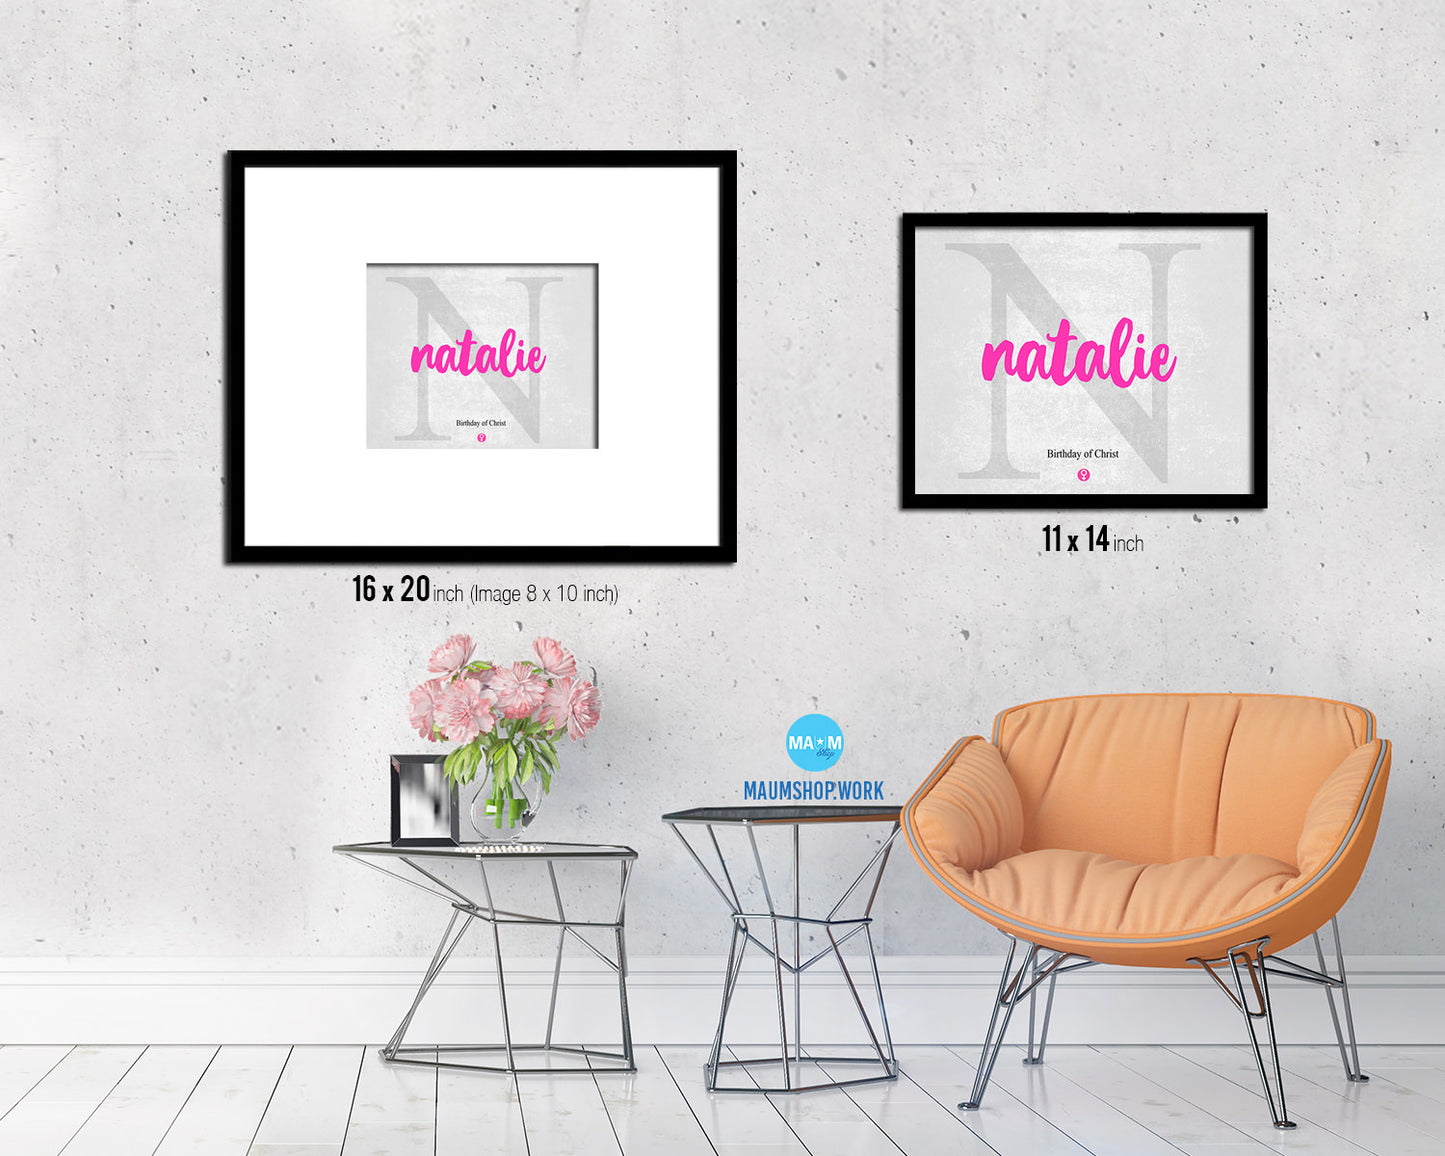 Natalie Personalized Biblical Name Plate Art Framed Print Kids Baby Room Wall Decor Gifts